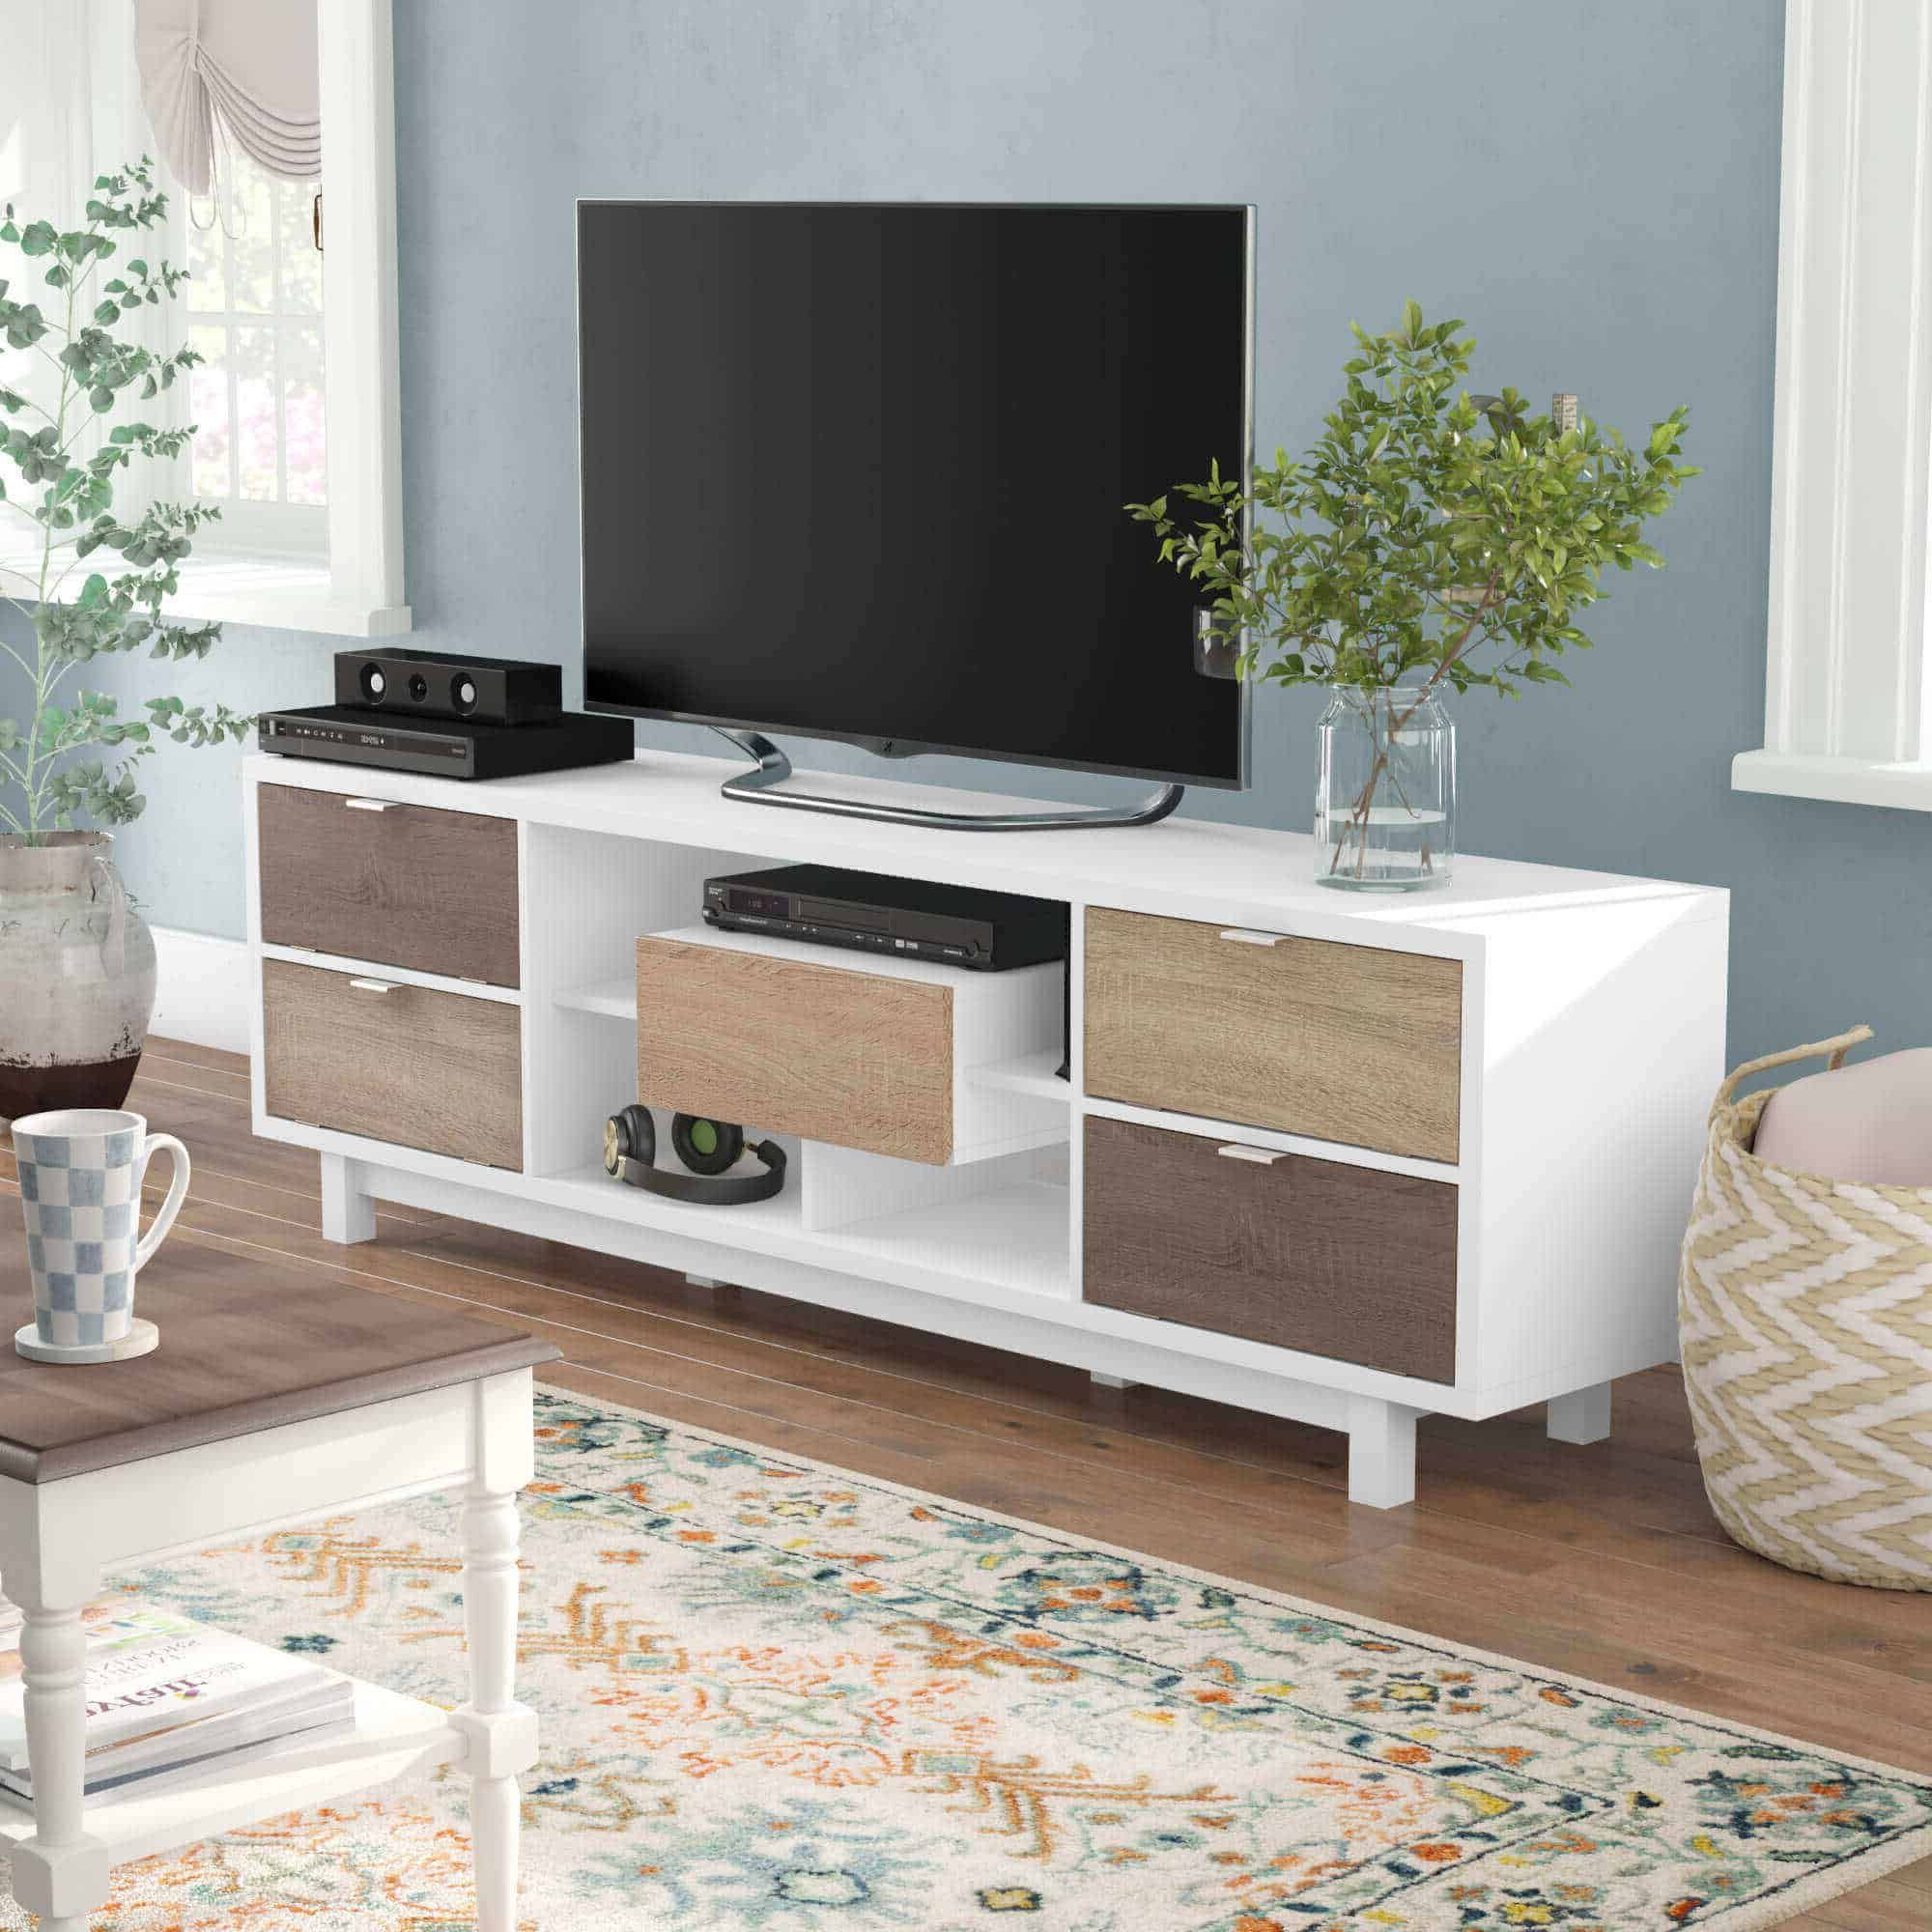 Most Beautiful And Incredible Tv Stand Design Ideas Regarding Modern Black Tabletop Tv Stands (Gallery 1 of 20)